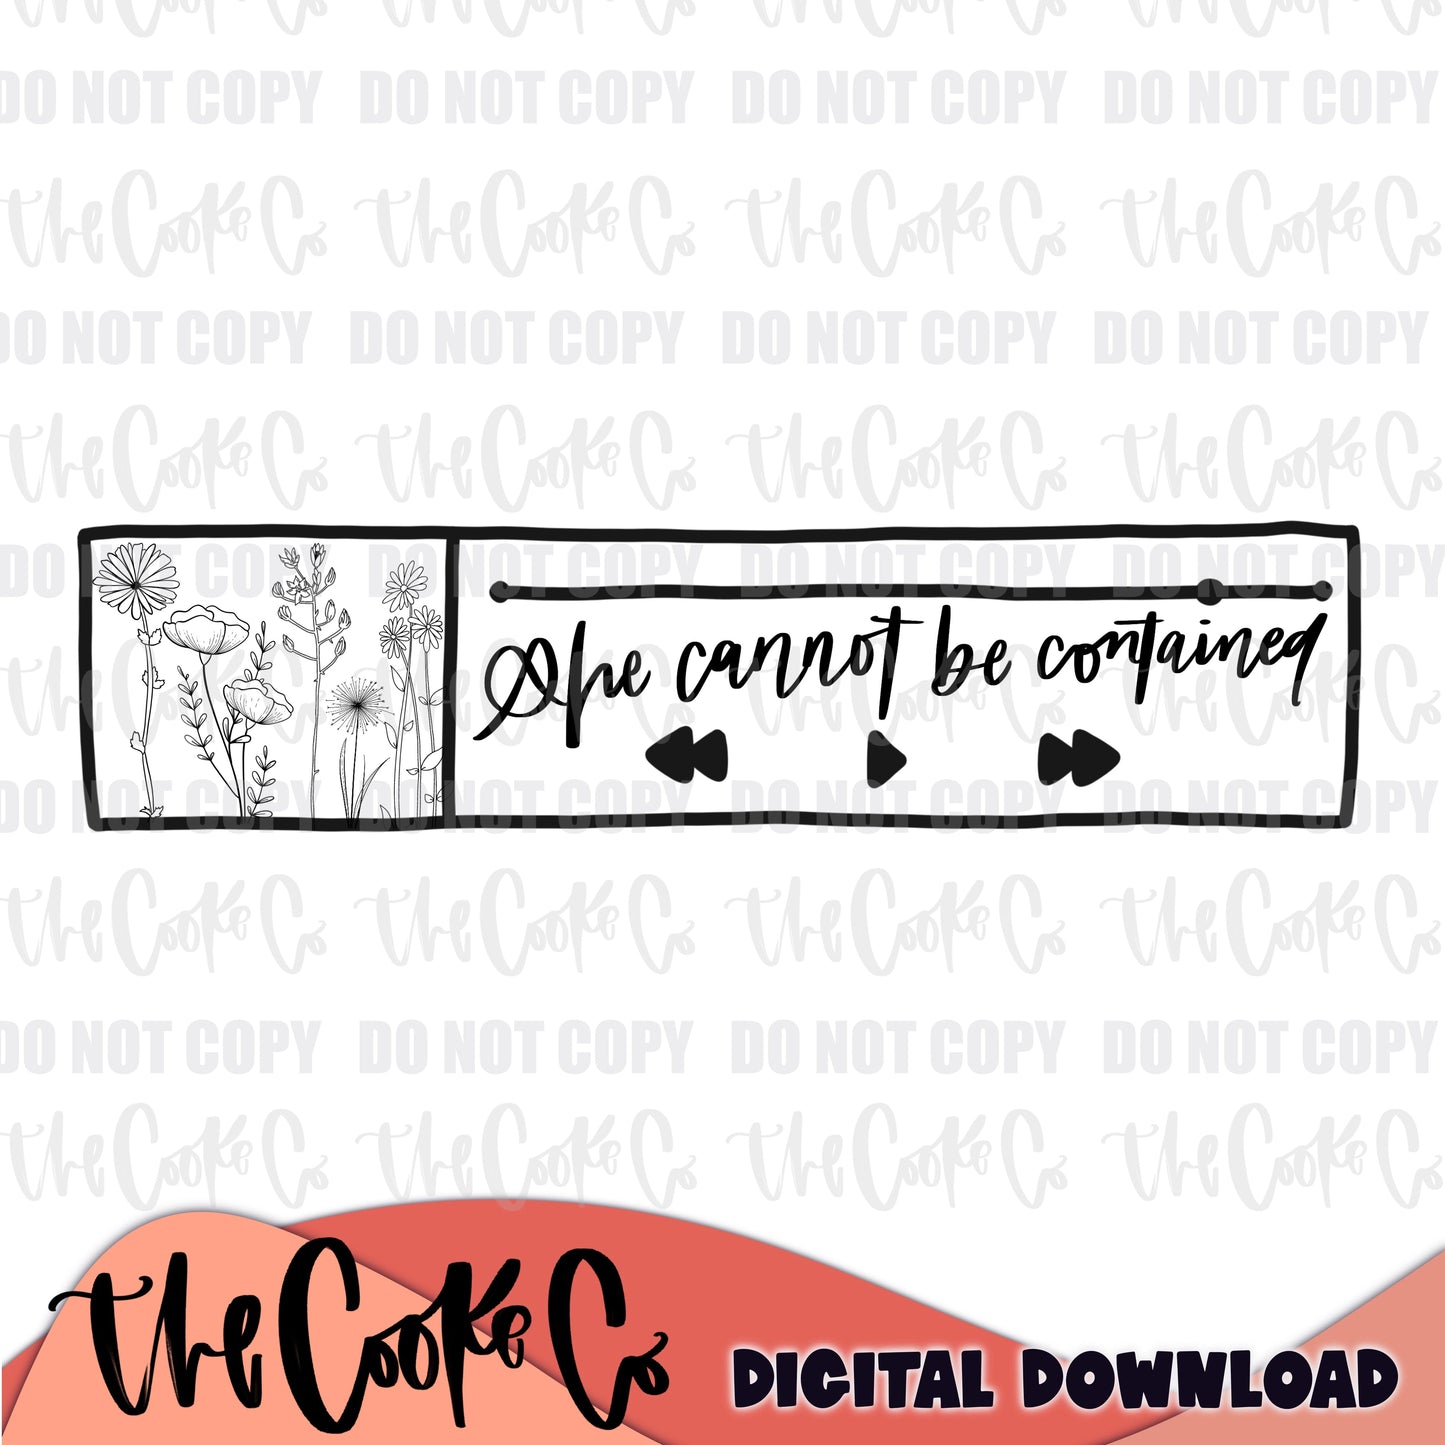 SHE CAN NOT BE CONTAINED | Digital Download | PNG